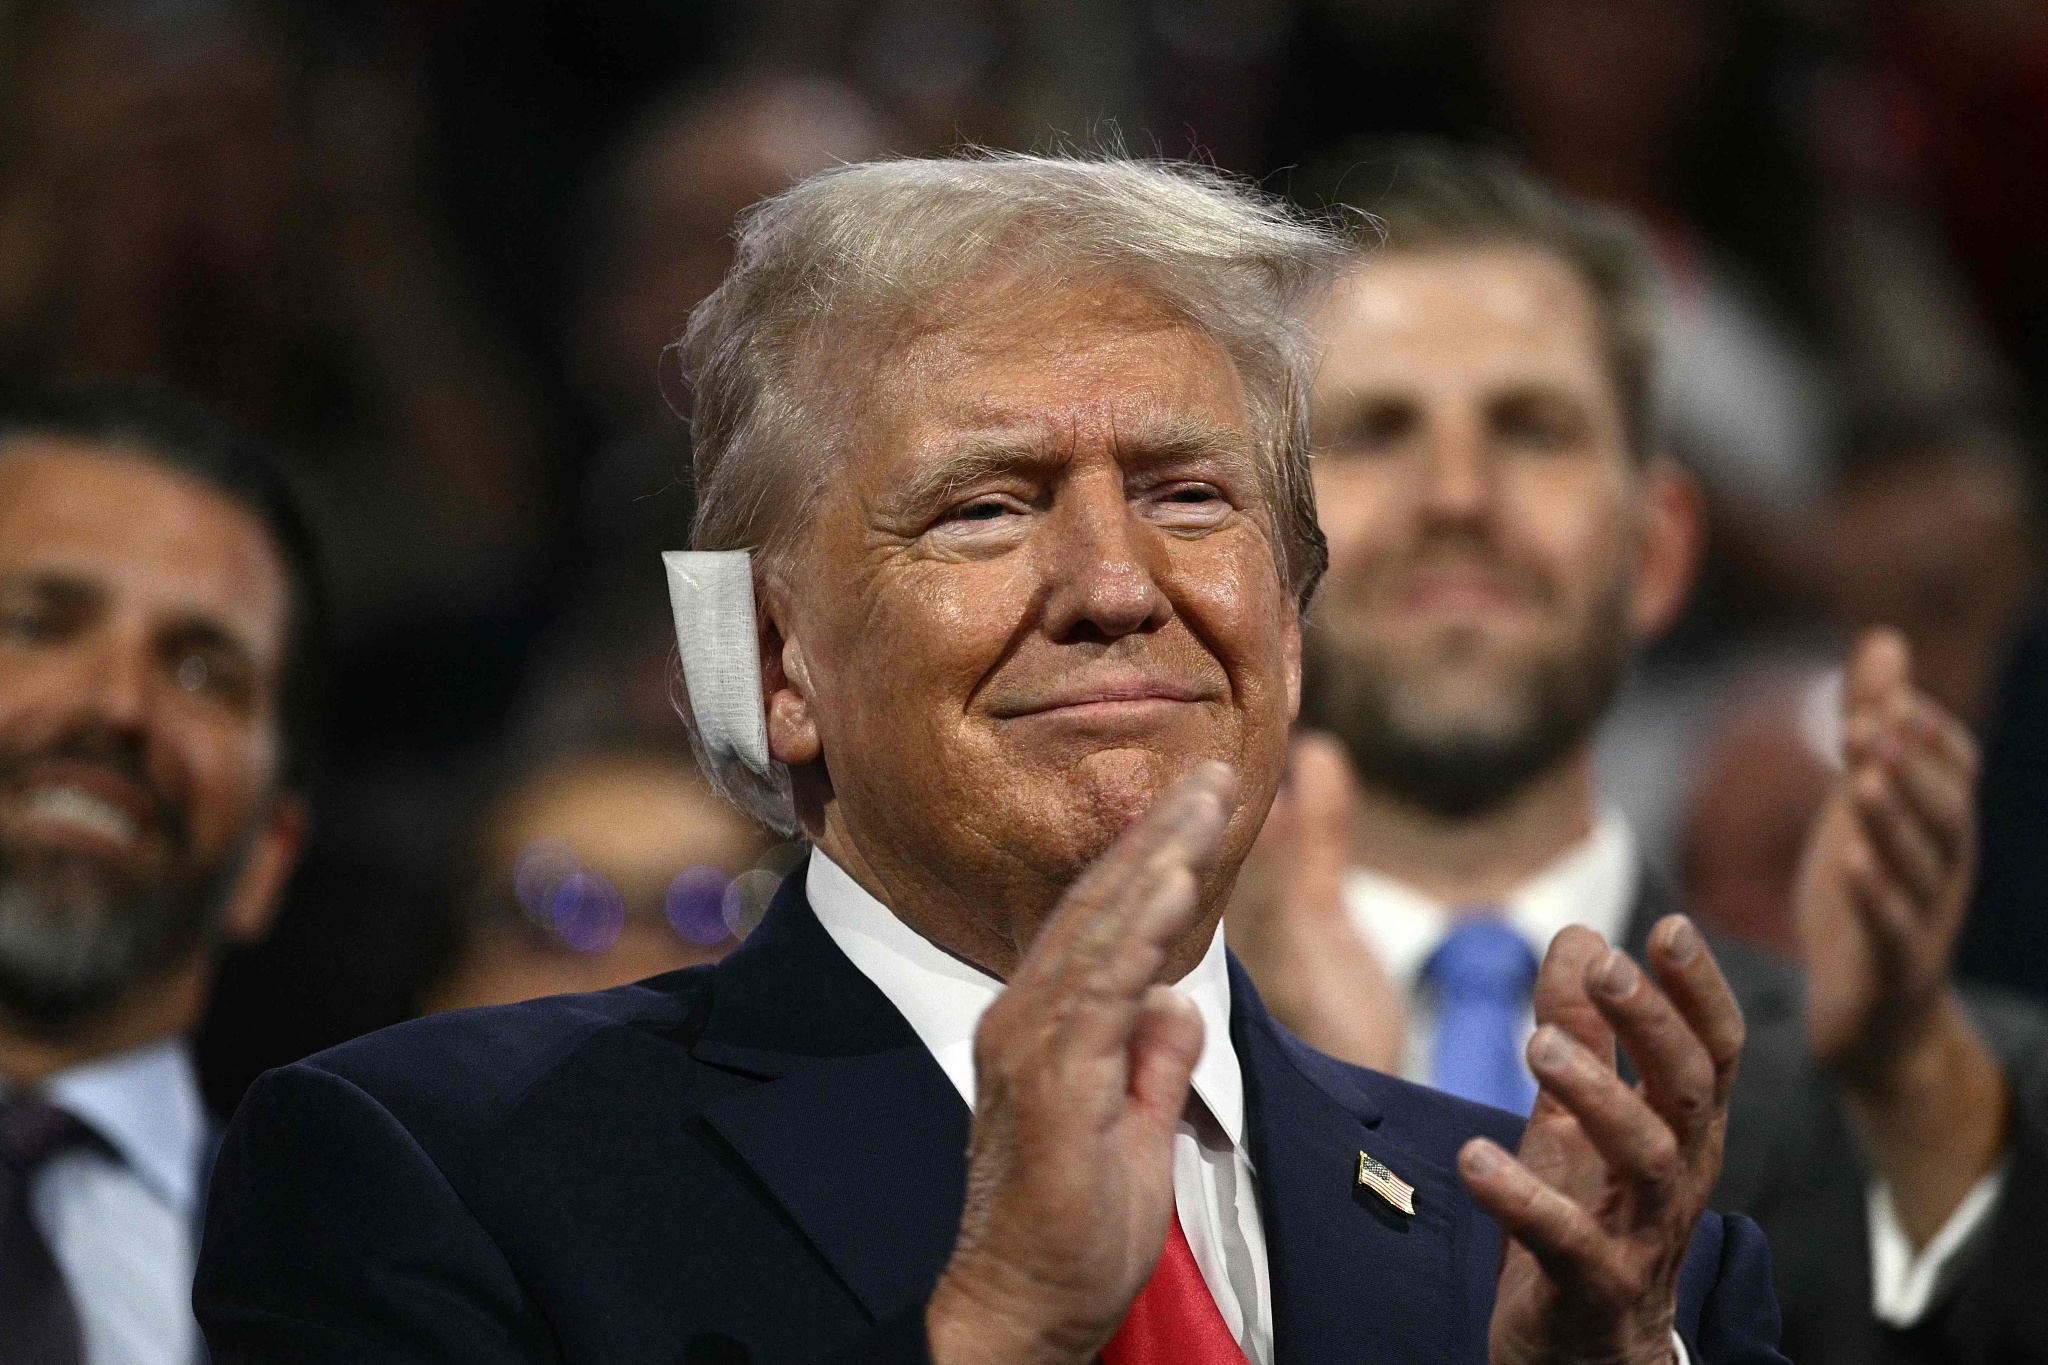 Former U.S. President and 2024 Republican presidential candidate Donald Trump with a bandage on his ear after being wounded in an assassination attempt, applauding during the first day of the 2024 Republican National Convention at the Fiserv Forum in Milwaukee, Wisconsin, July 15, 2024. /CFP